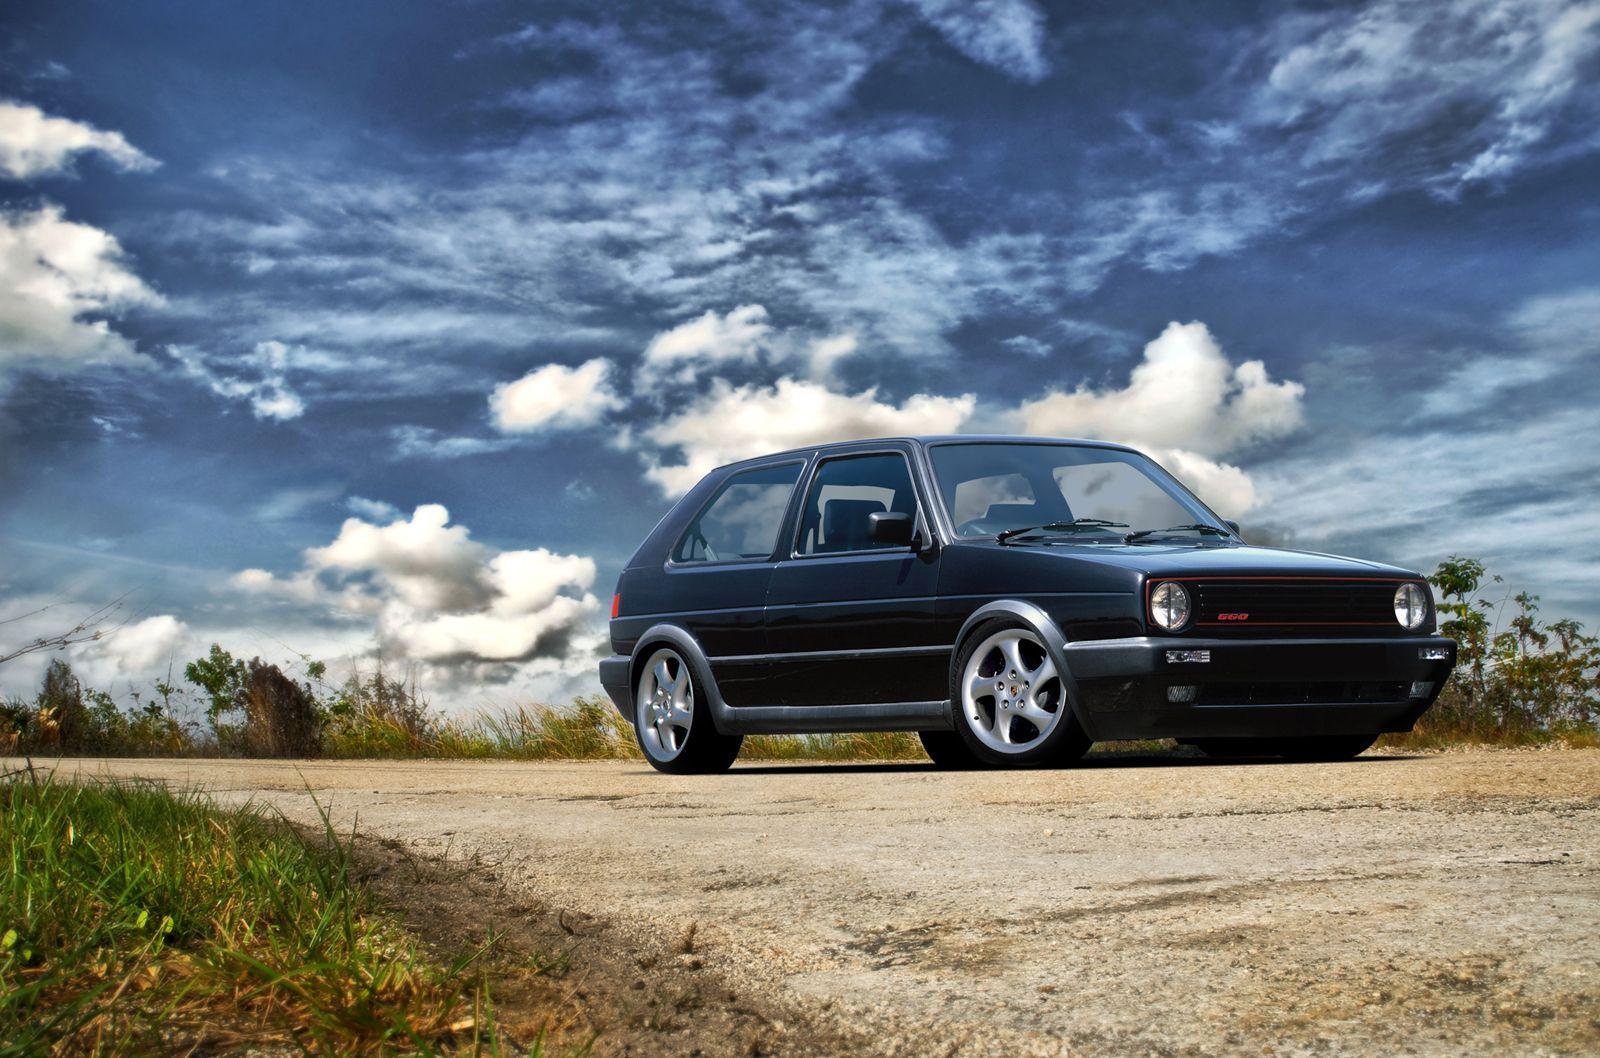 Golf 2 Wallpaper Iphone We look at golf gti tuning and report on the ...